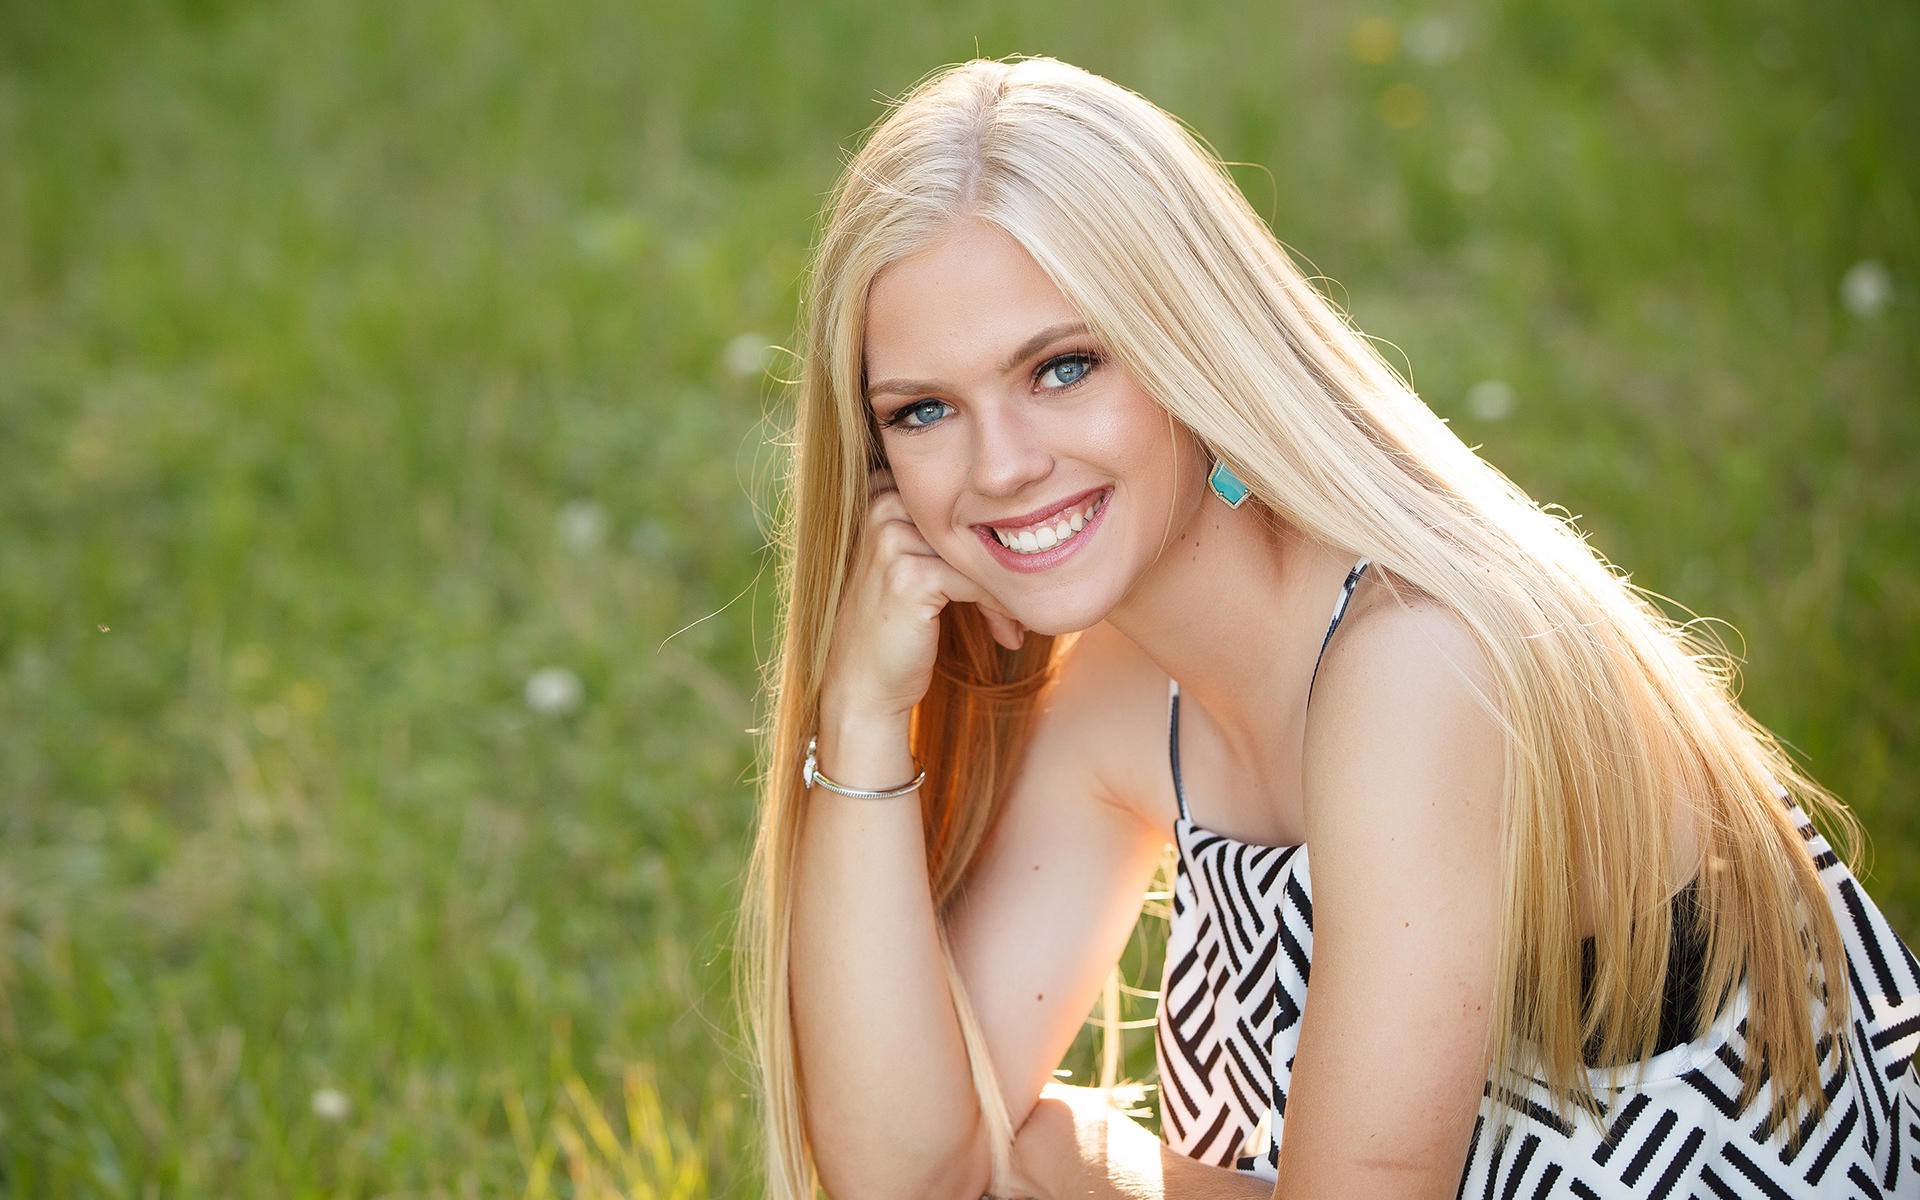 Bryan-College-Station-Senior-Photography-research-park-Stefanie-Russell-Photography